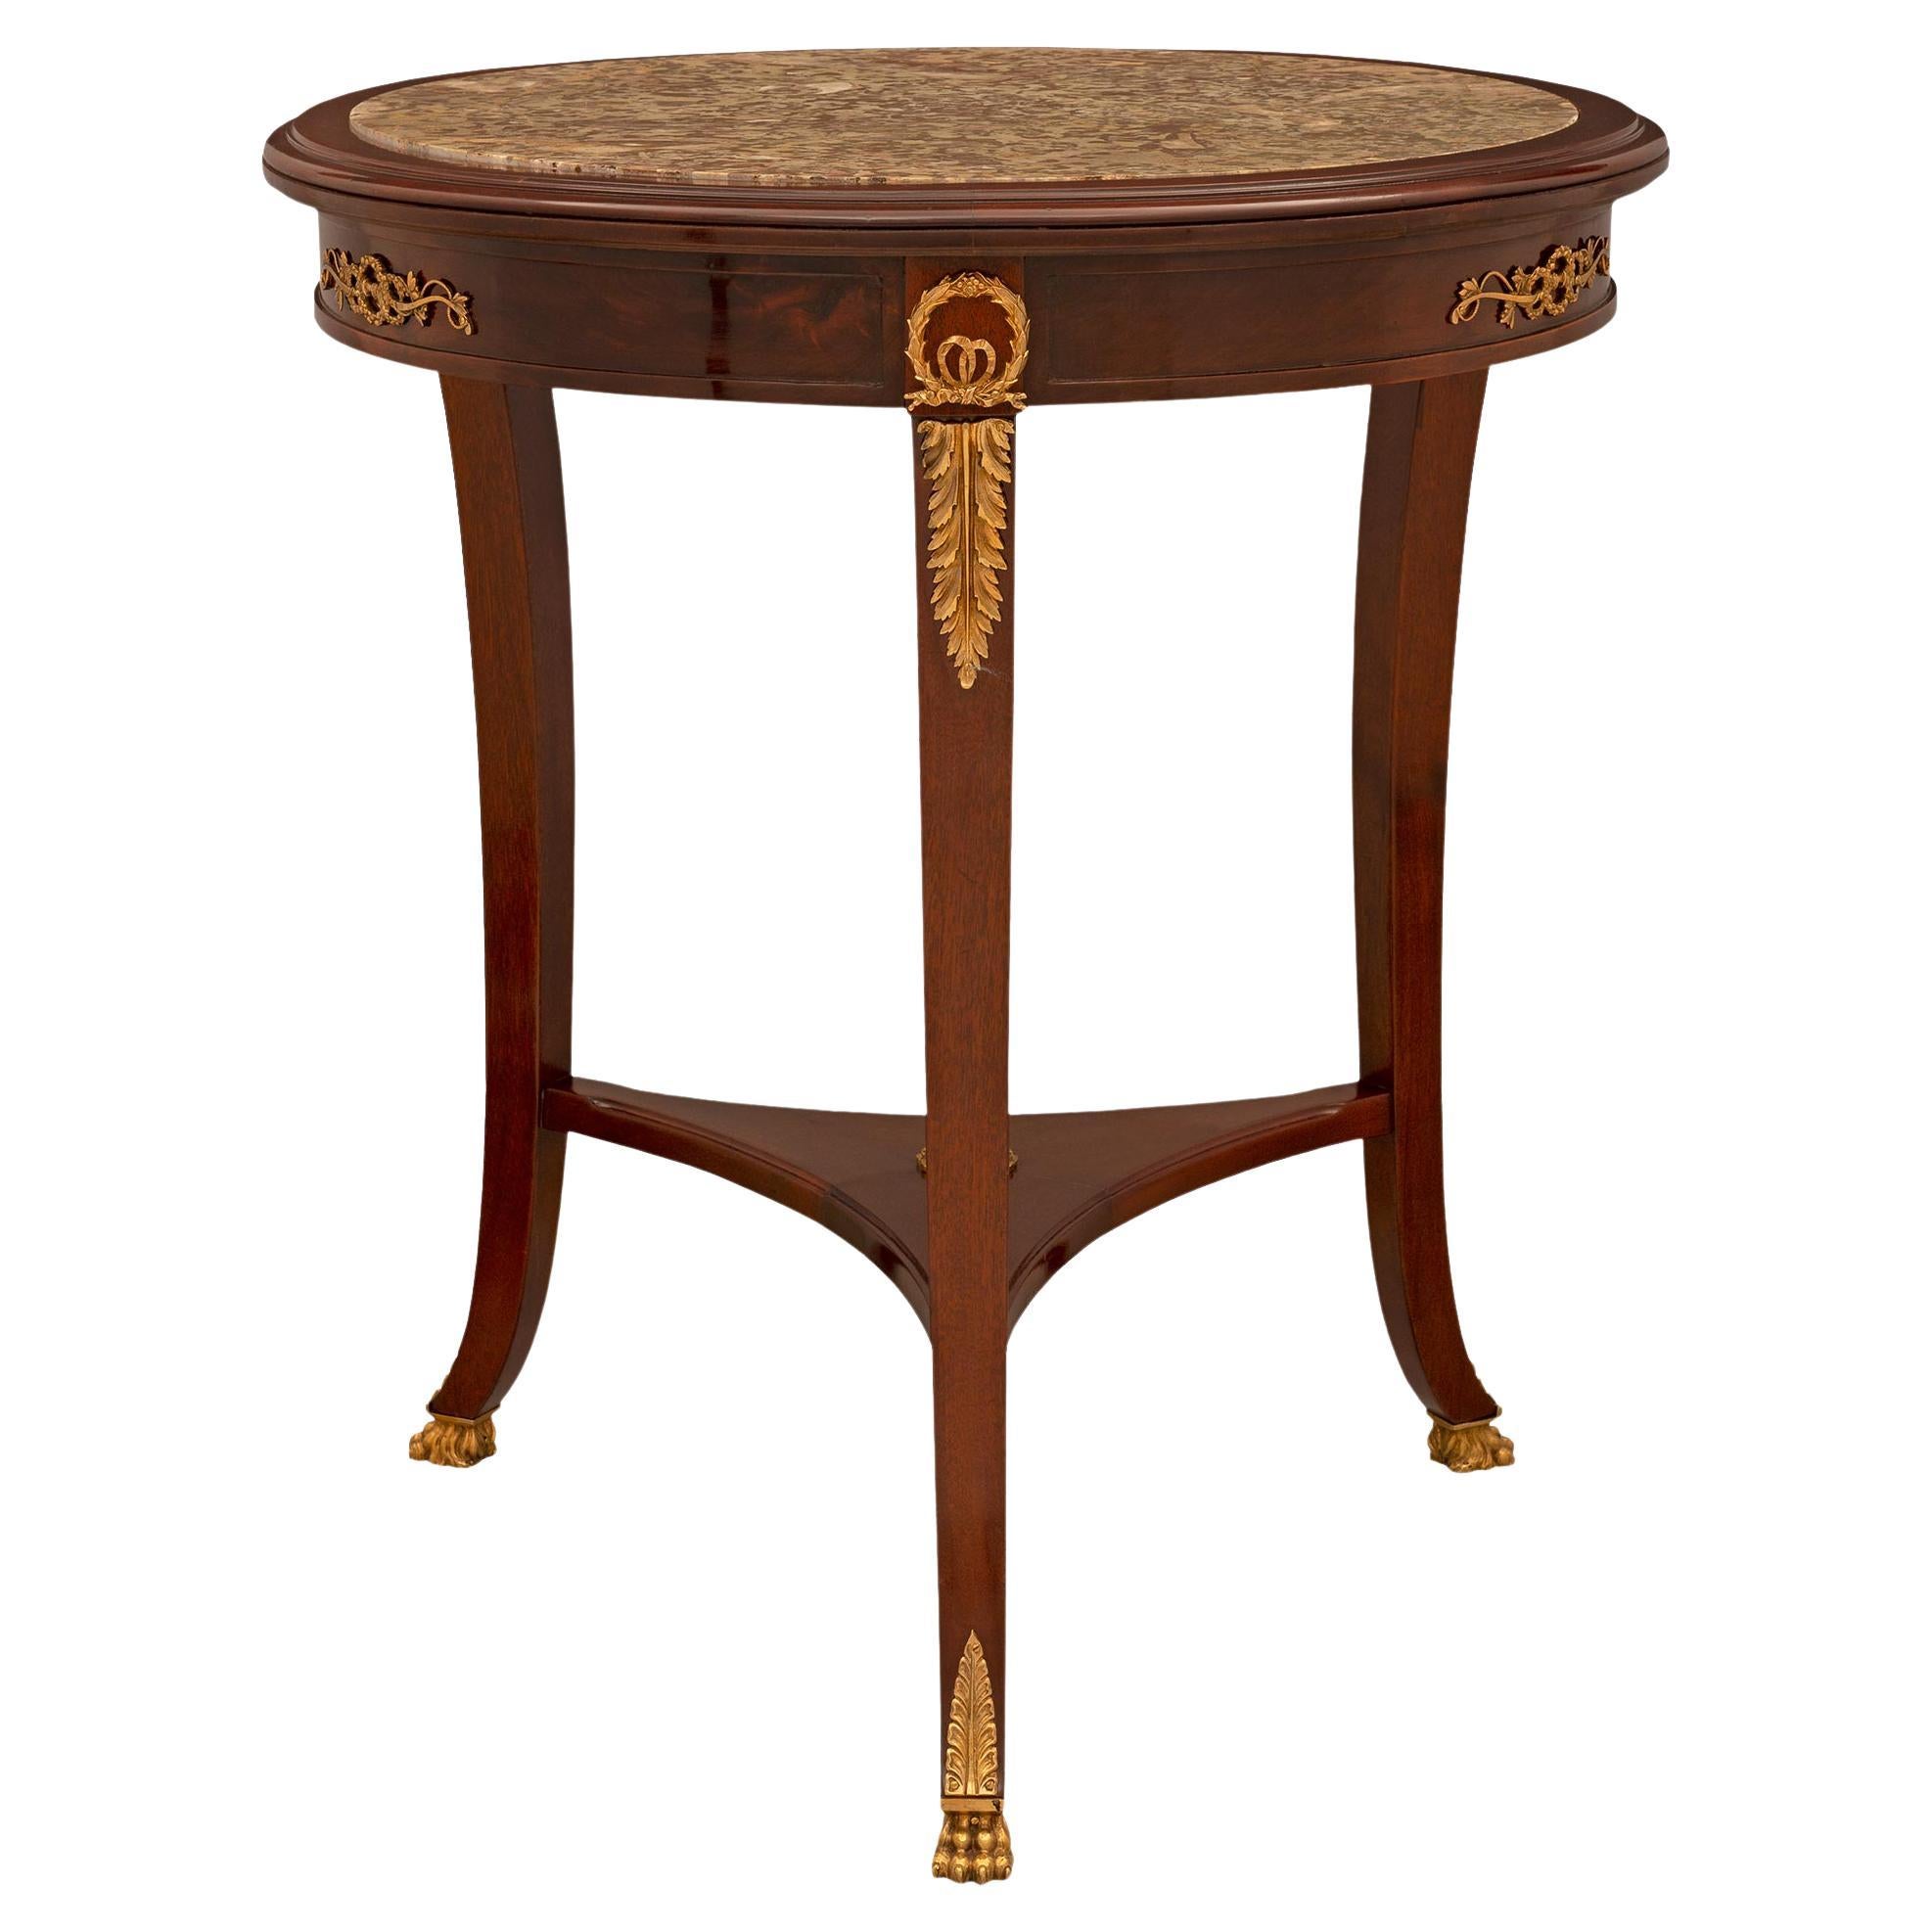 French 19th Century Empire St. Mahogany, Ormolu, and Marble Side Table